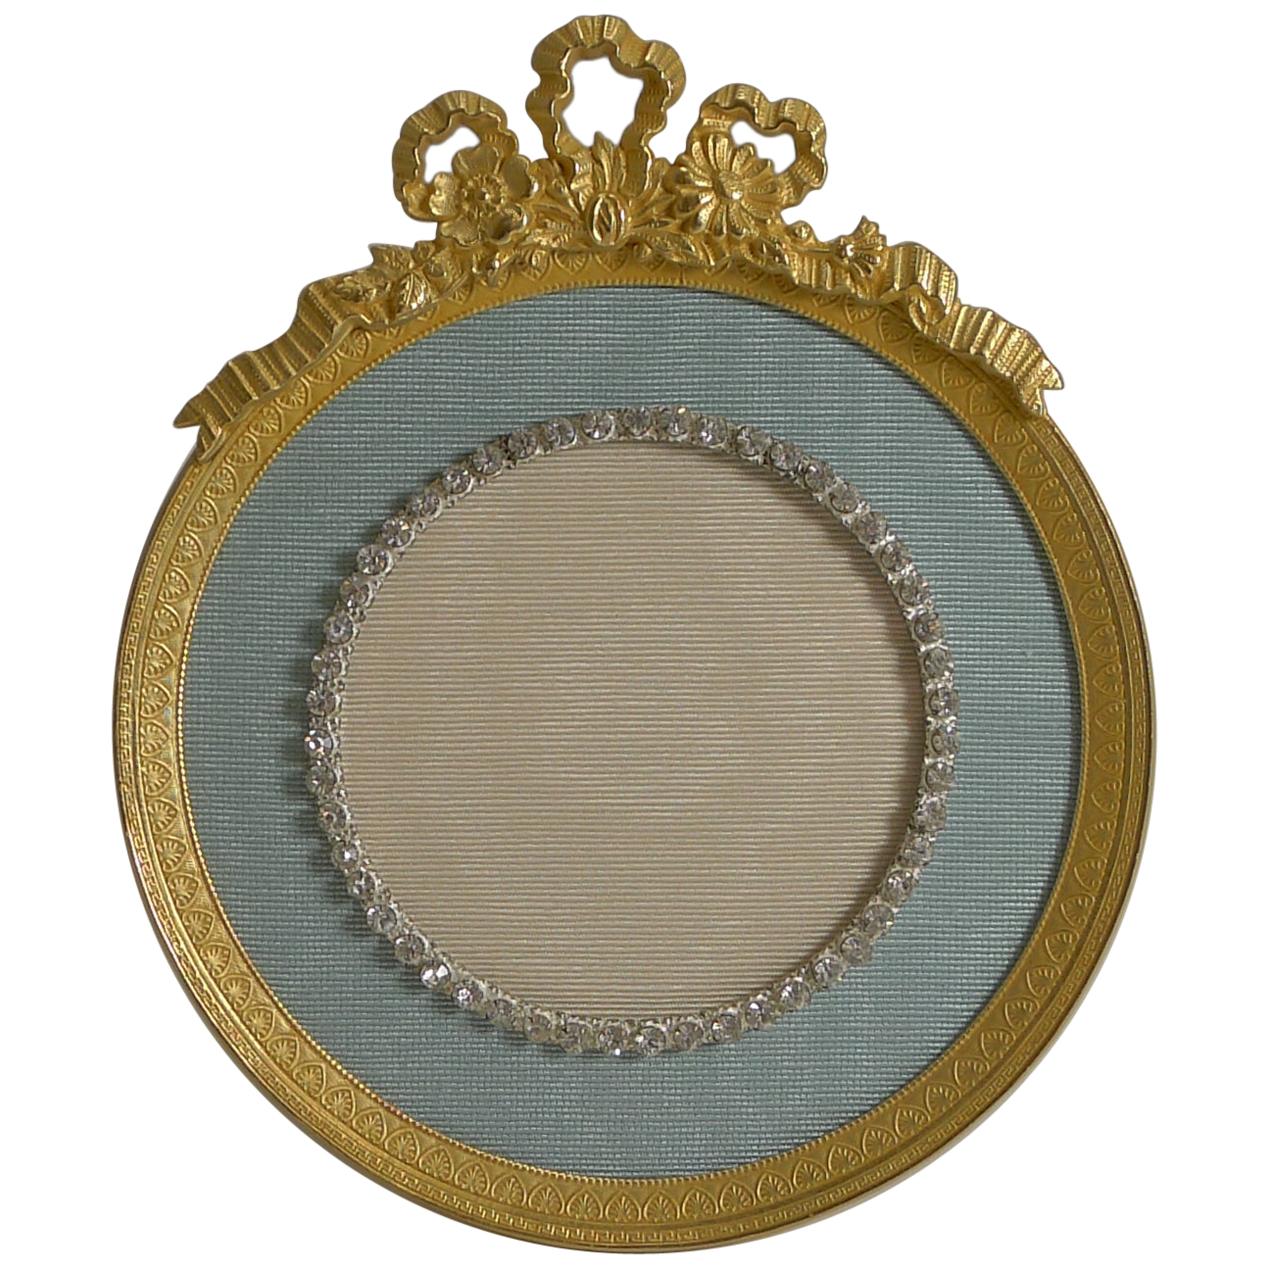 Antique French Gilded Bronze Picture Frame, Paste Stones, circa 1900